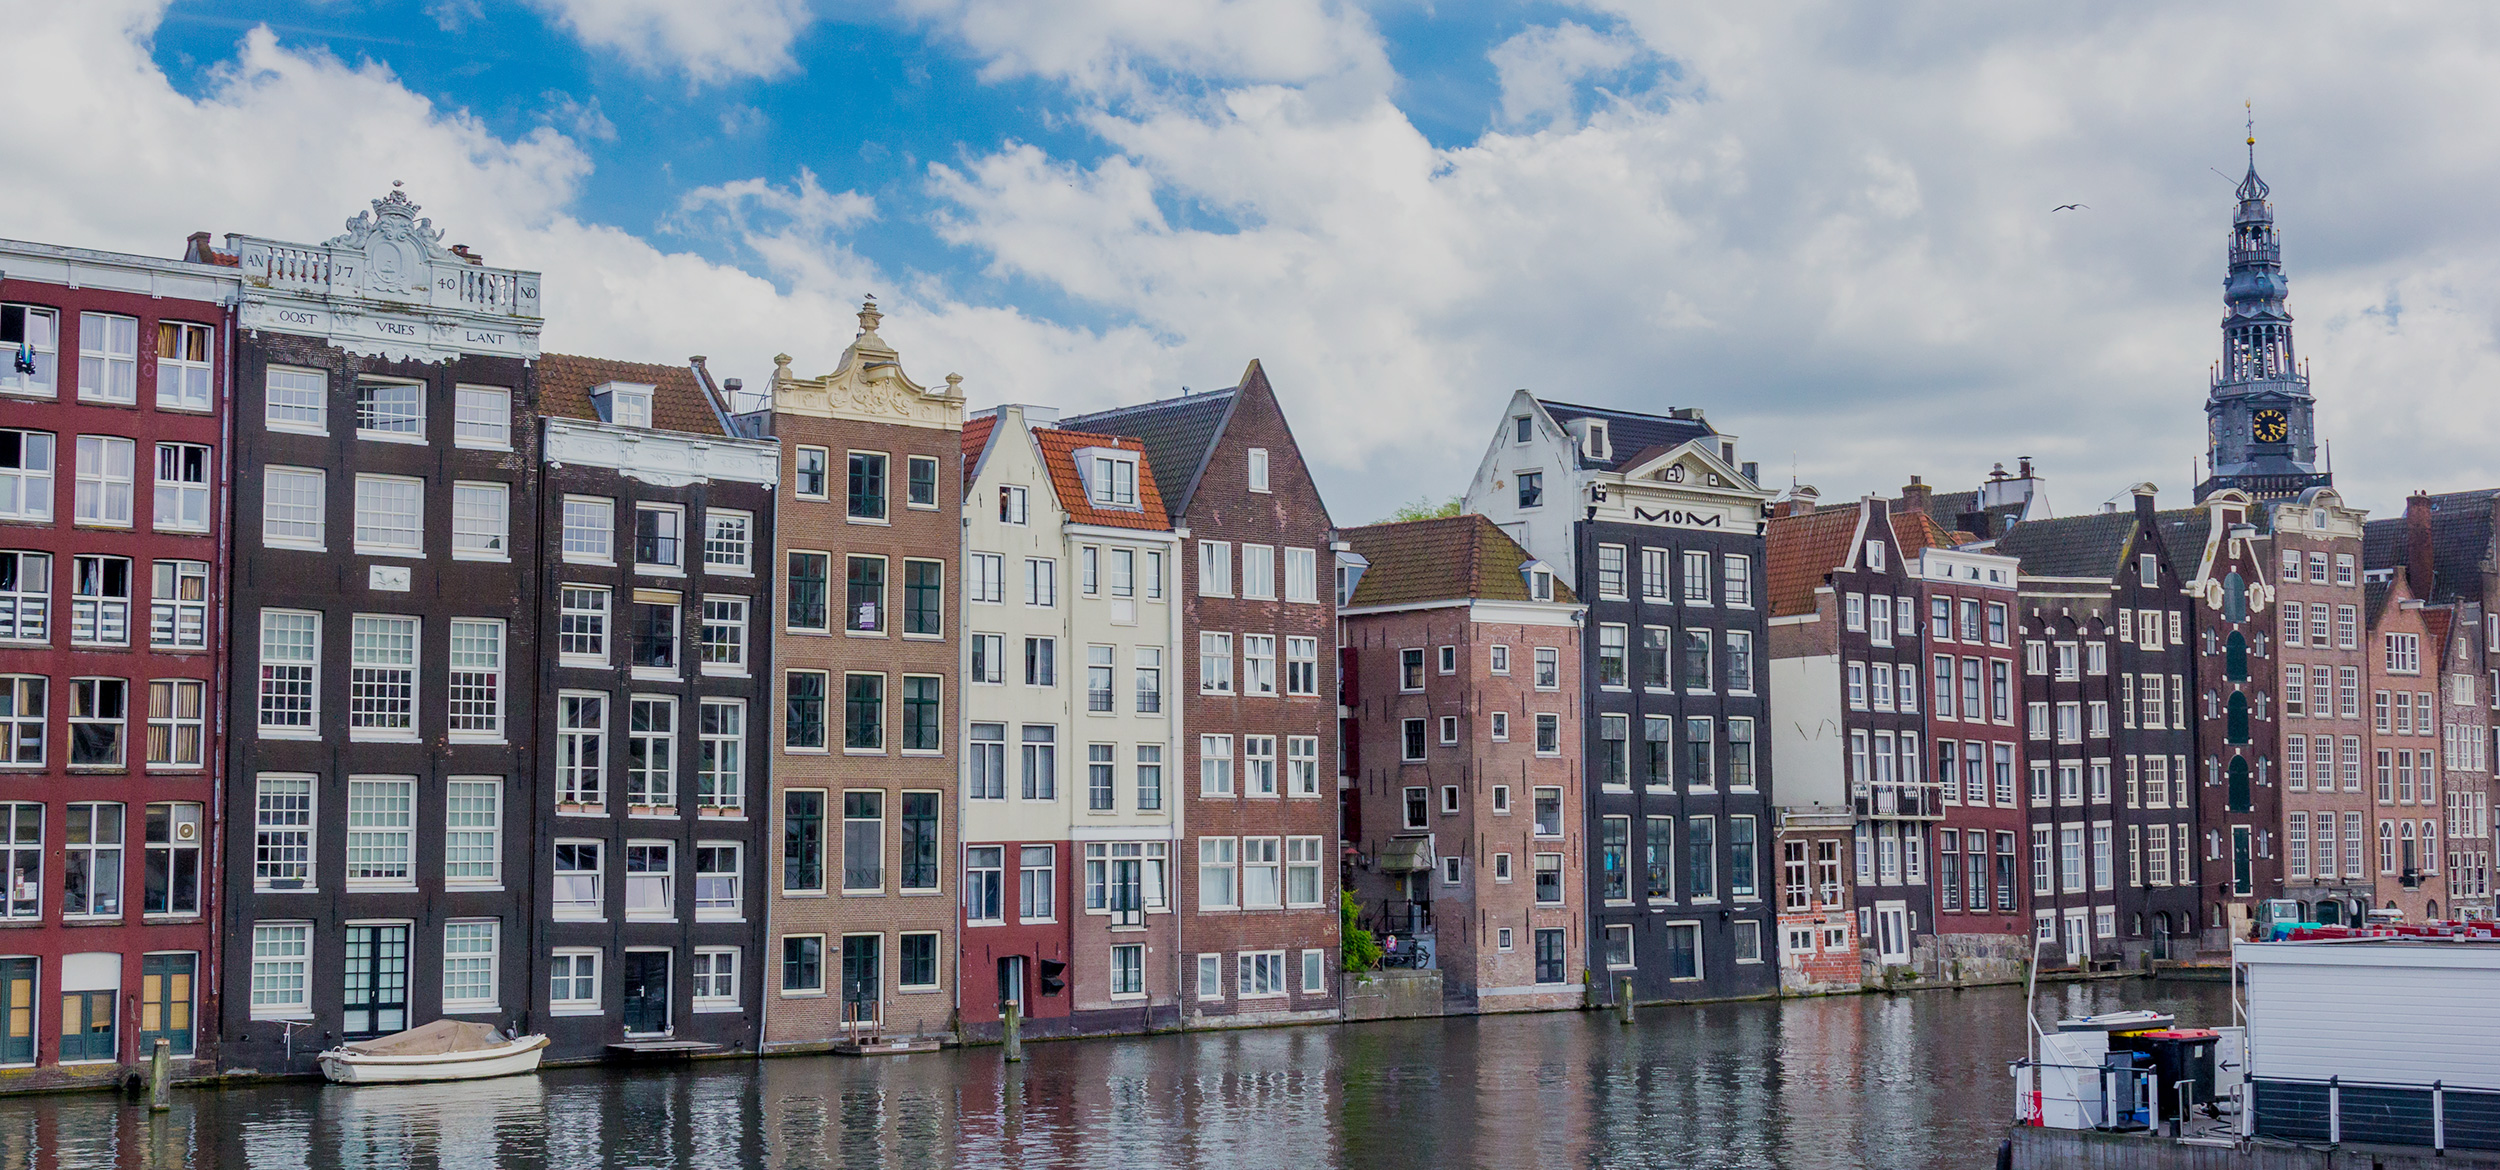 Colorful row of old Dutch houses reflected in a canal in Amsterdam in the Netherlands.